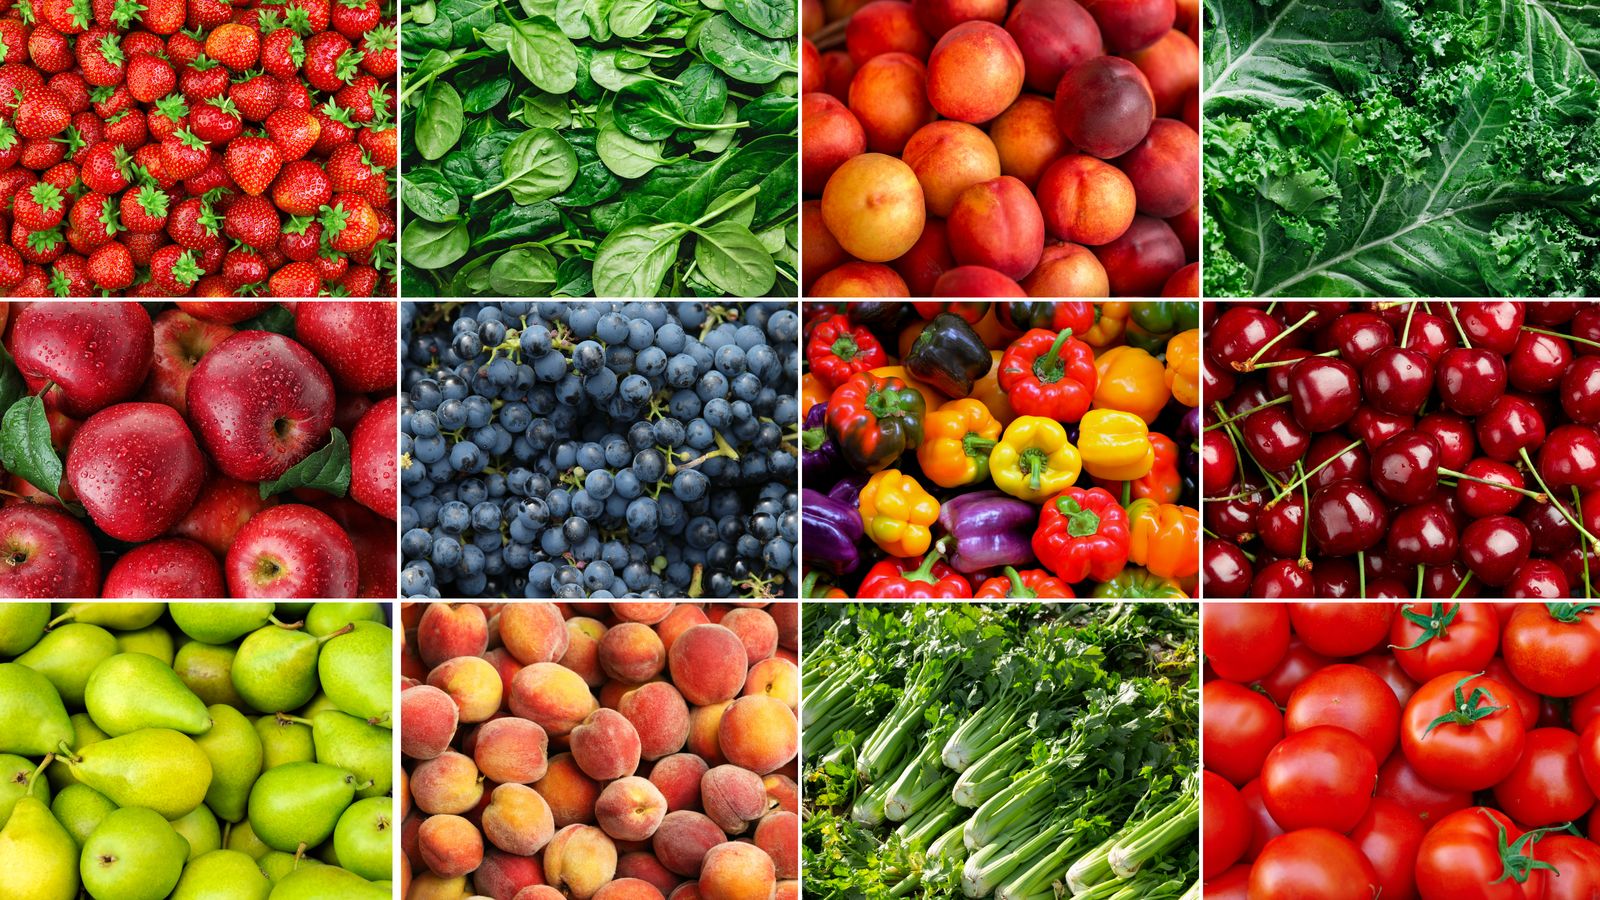 12 Fruits & Veggies That Literally Last for Months - Produce Storage